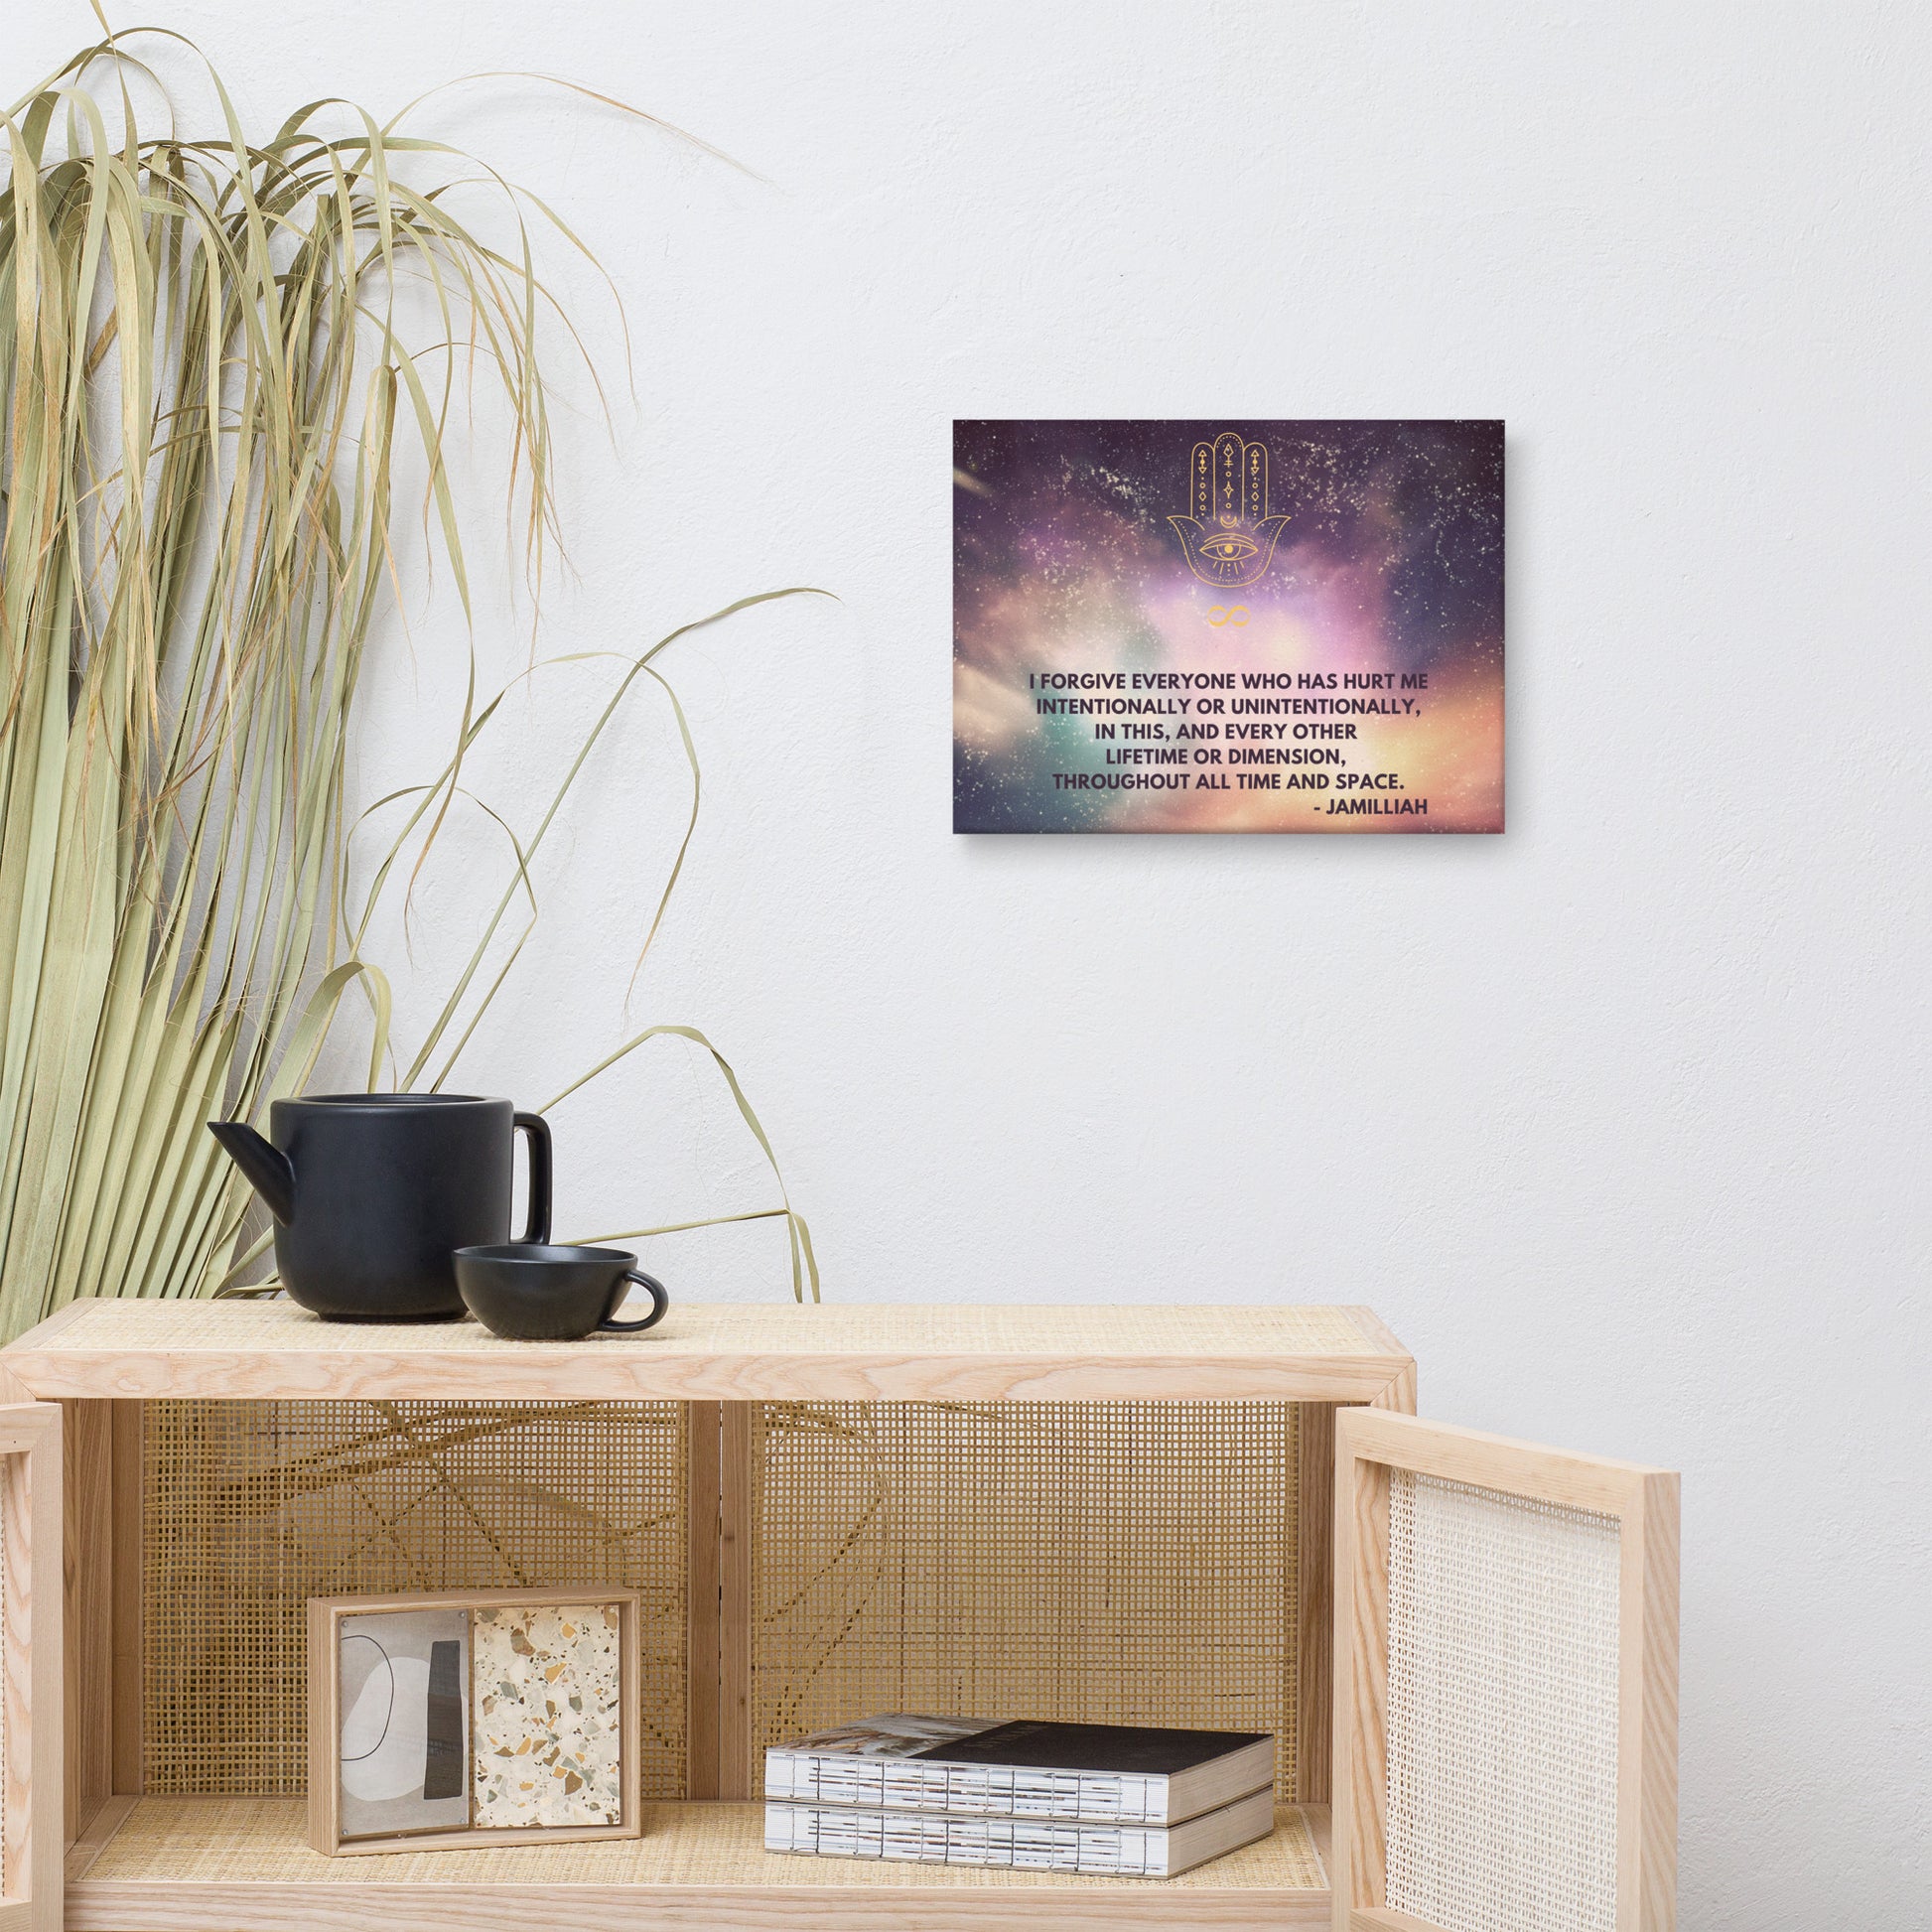 12x16 inch, semi-gloss/textured/fade resistant canvas print. Purple/green/yellow space/universe/cosmos design with spiritual hamsa hand/infinity symbol/sign brand logo image, and original wise quote mantra/saying/tagline/motto/slogan. "I Forgive Everyone Who Has Hurt Me Intentionally Or Unintentionally, In This, And Every Other Lifetime Or Dimension, Throughout All Time And Space. - Jamilliah." Shown on wall next to plant, cabinet, mug, and teapot. JAMILLIAH'S WISDOM IS TIMELESS SHOP - wisdomistimeless.com.